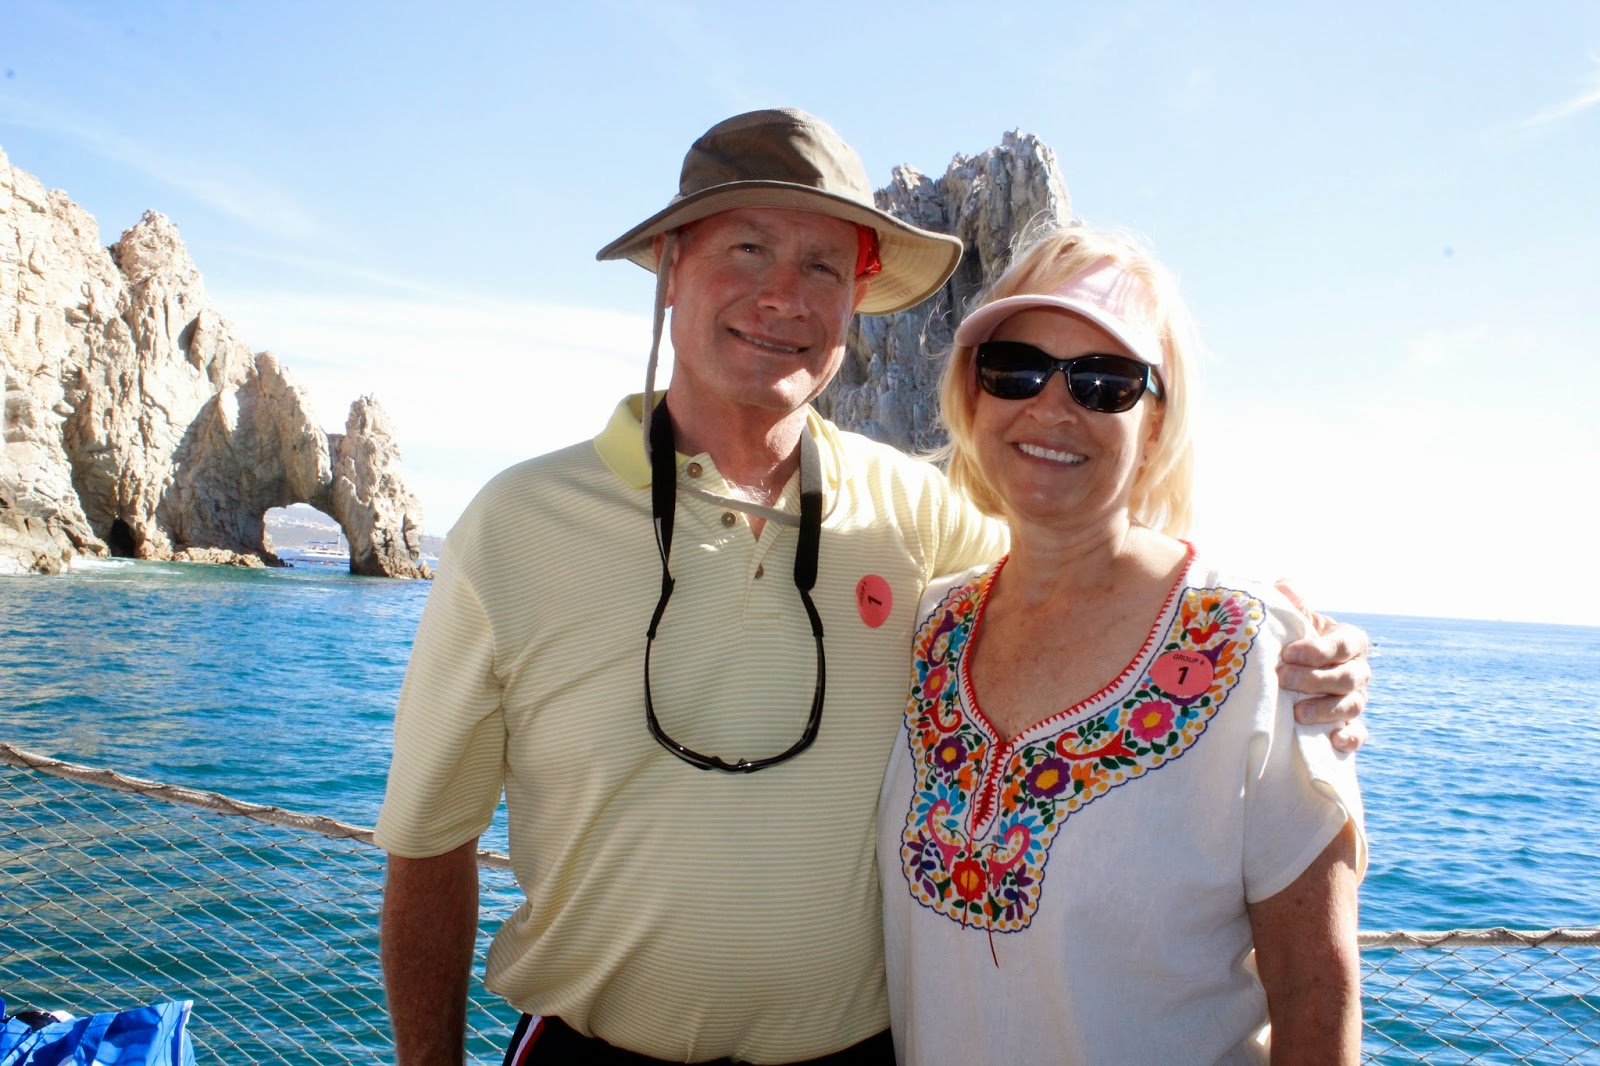 John and Annette in Cabo San Lucas